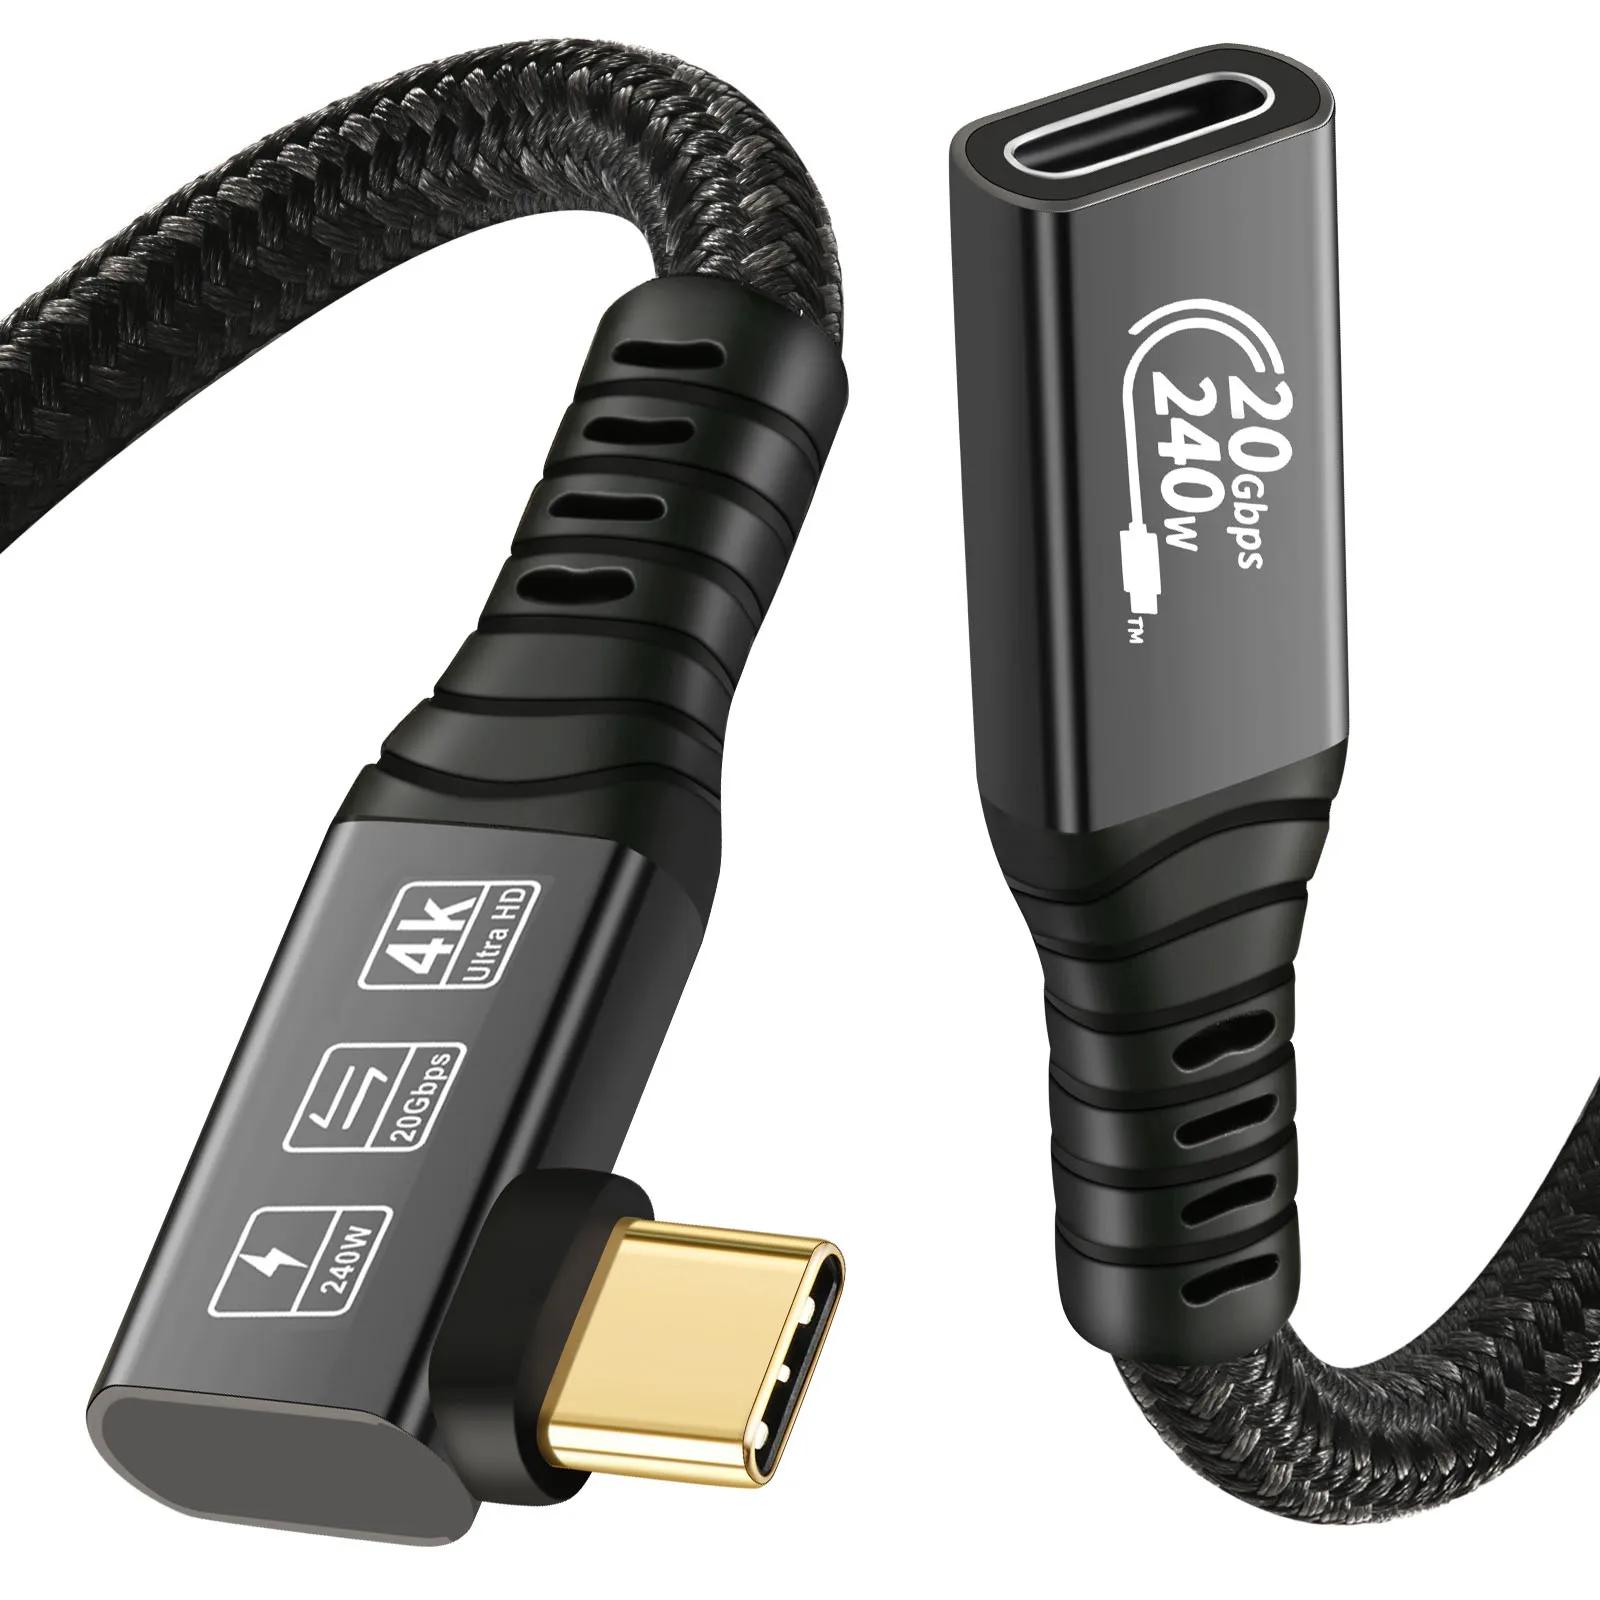 USB C Ÿ -  ̺, 20Gbps USB C 3.2 ͽټ ̺, 90  USBC 3.2 Gen2, 4K @ 60Hz 240W , 20Gbps 